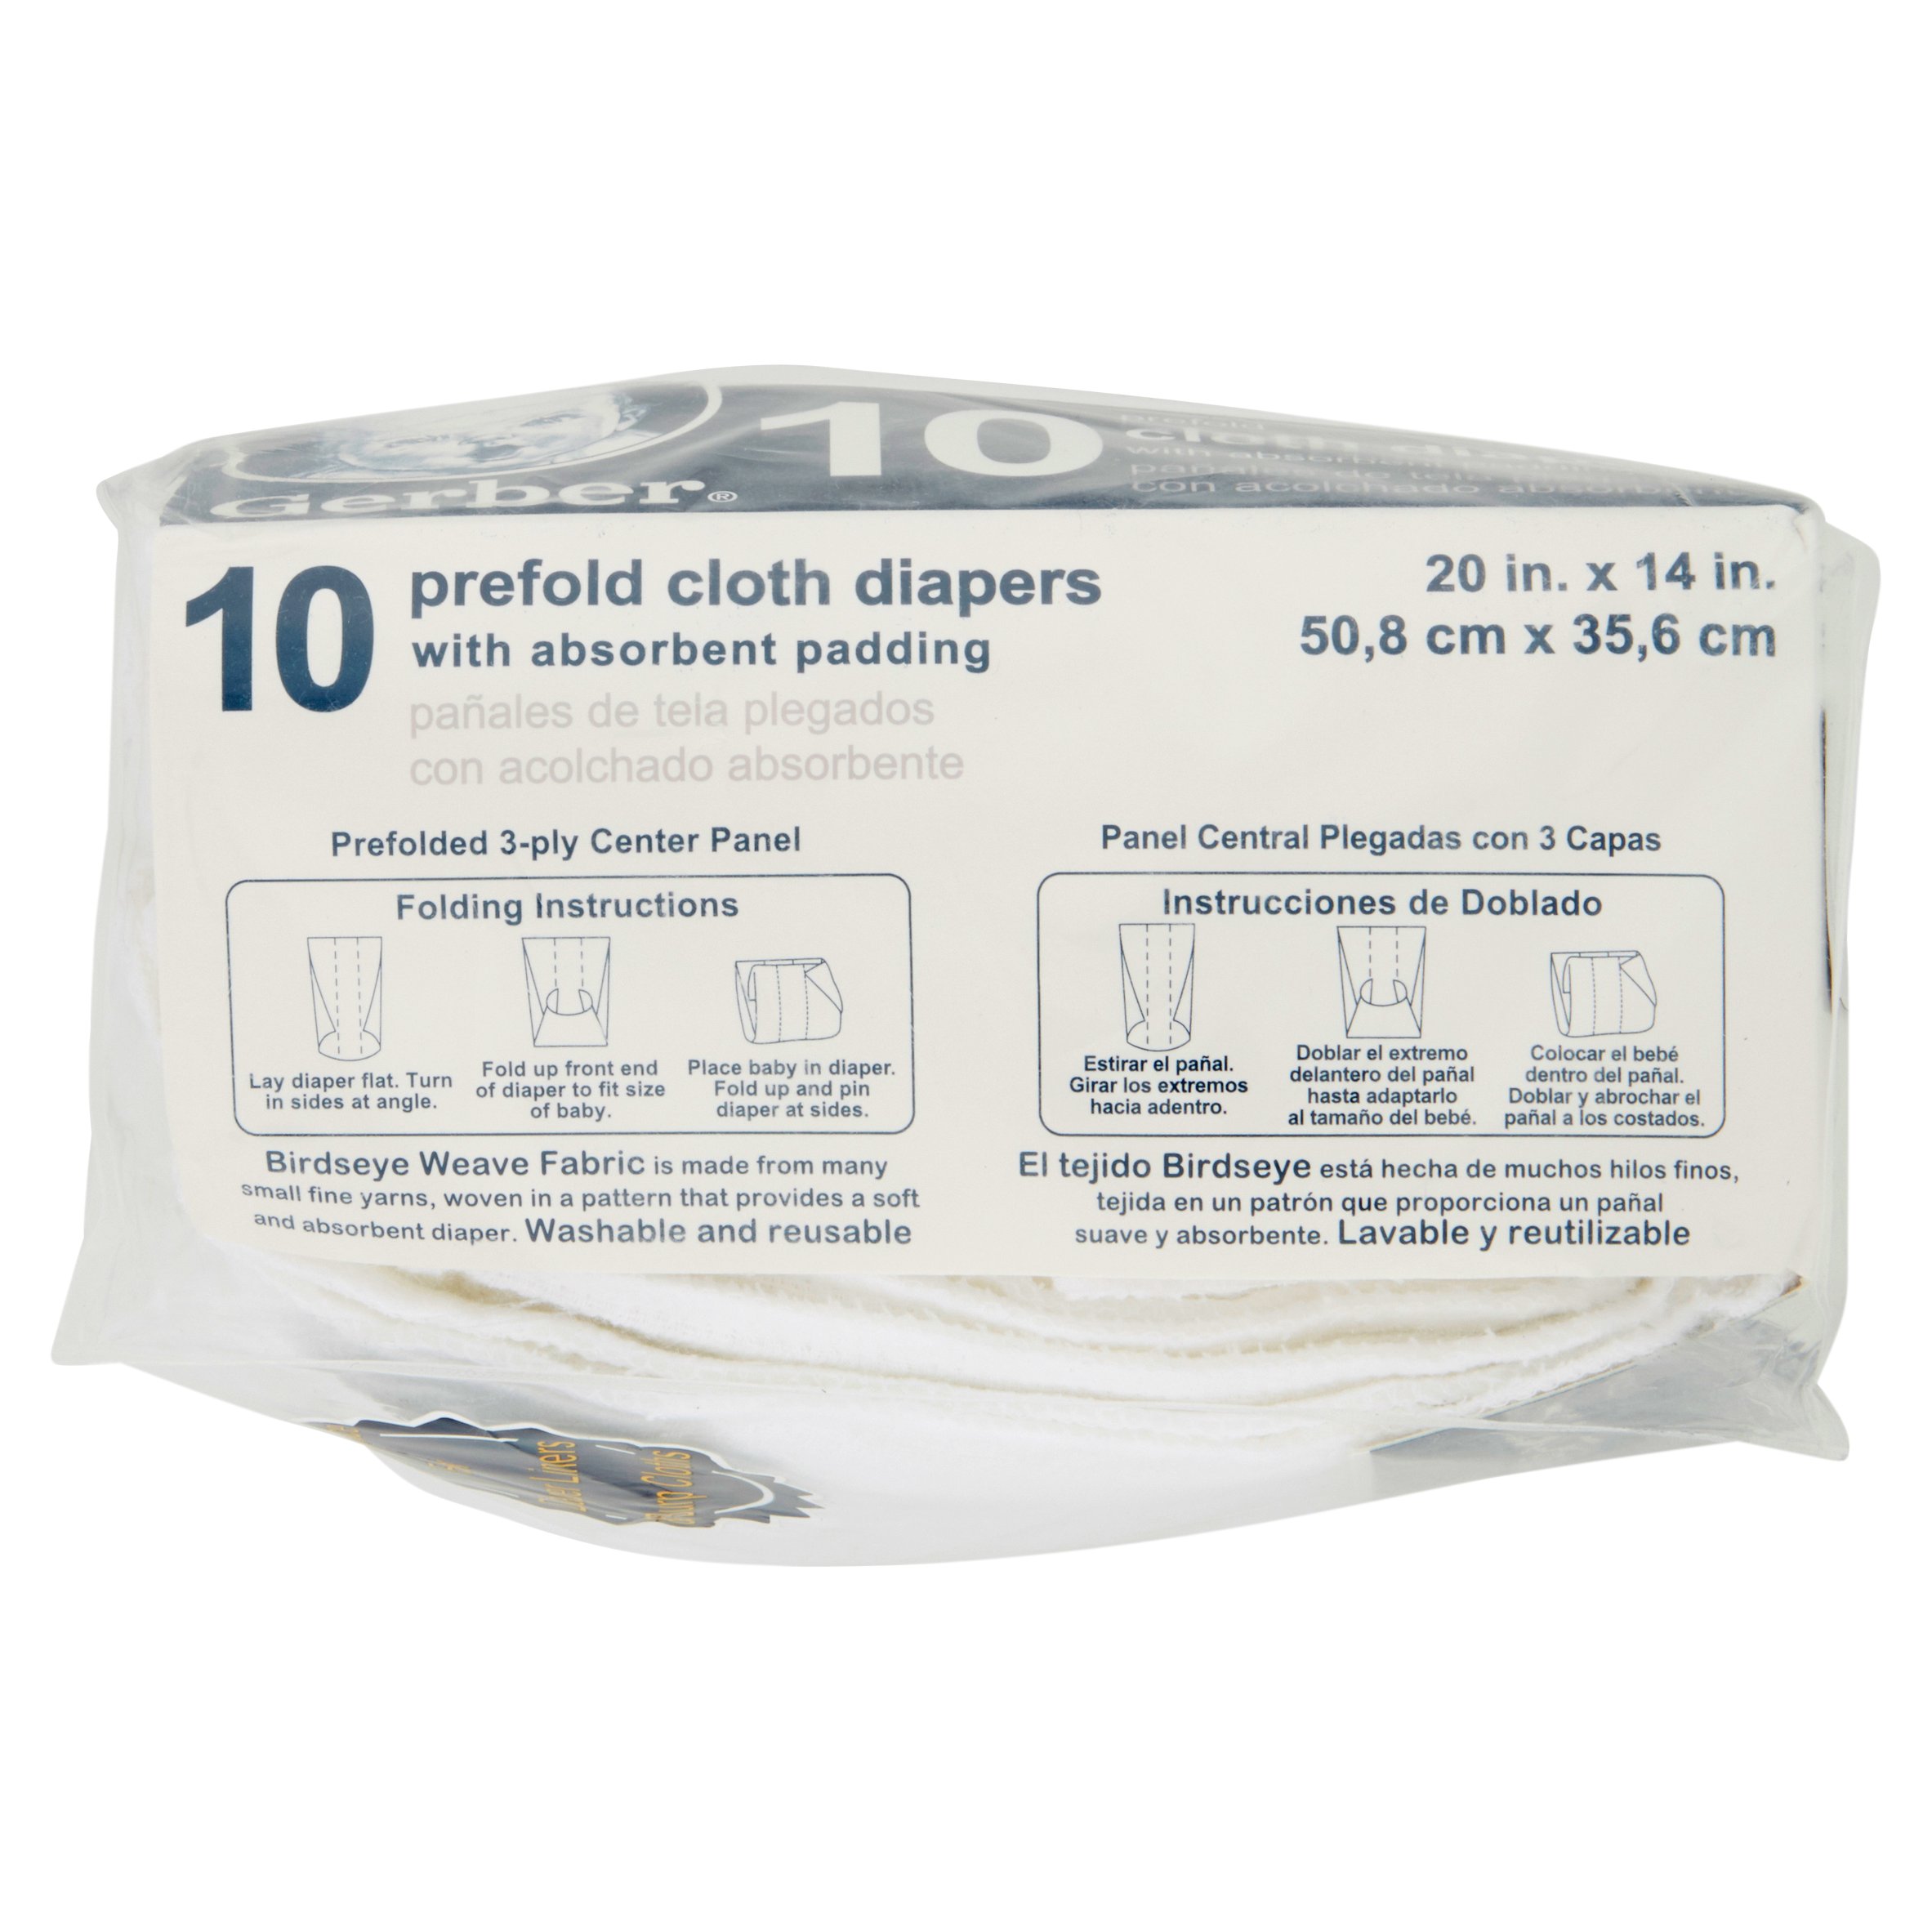 Gerber 100% Cotton Prefold Cloth Baby Diaper, White 10 Pack - image 5 of 8